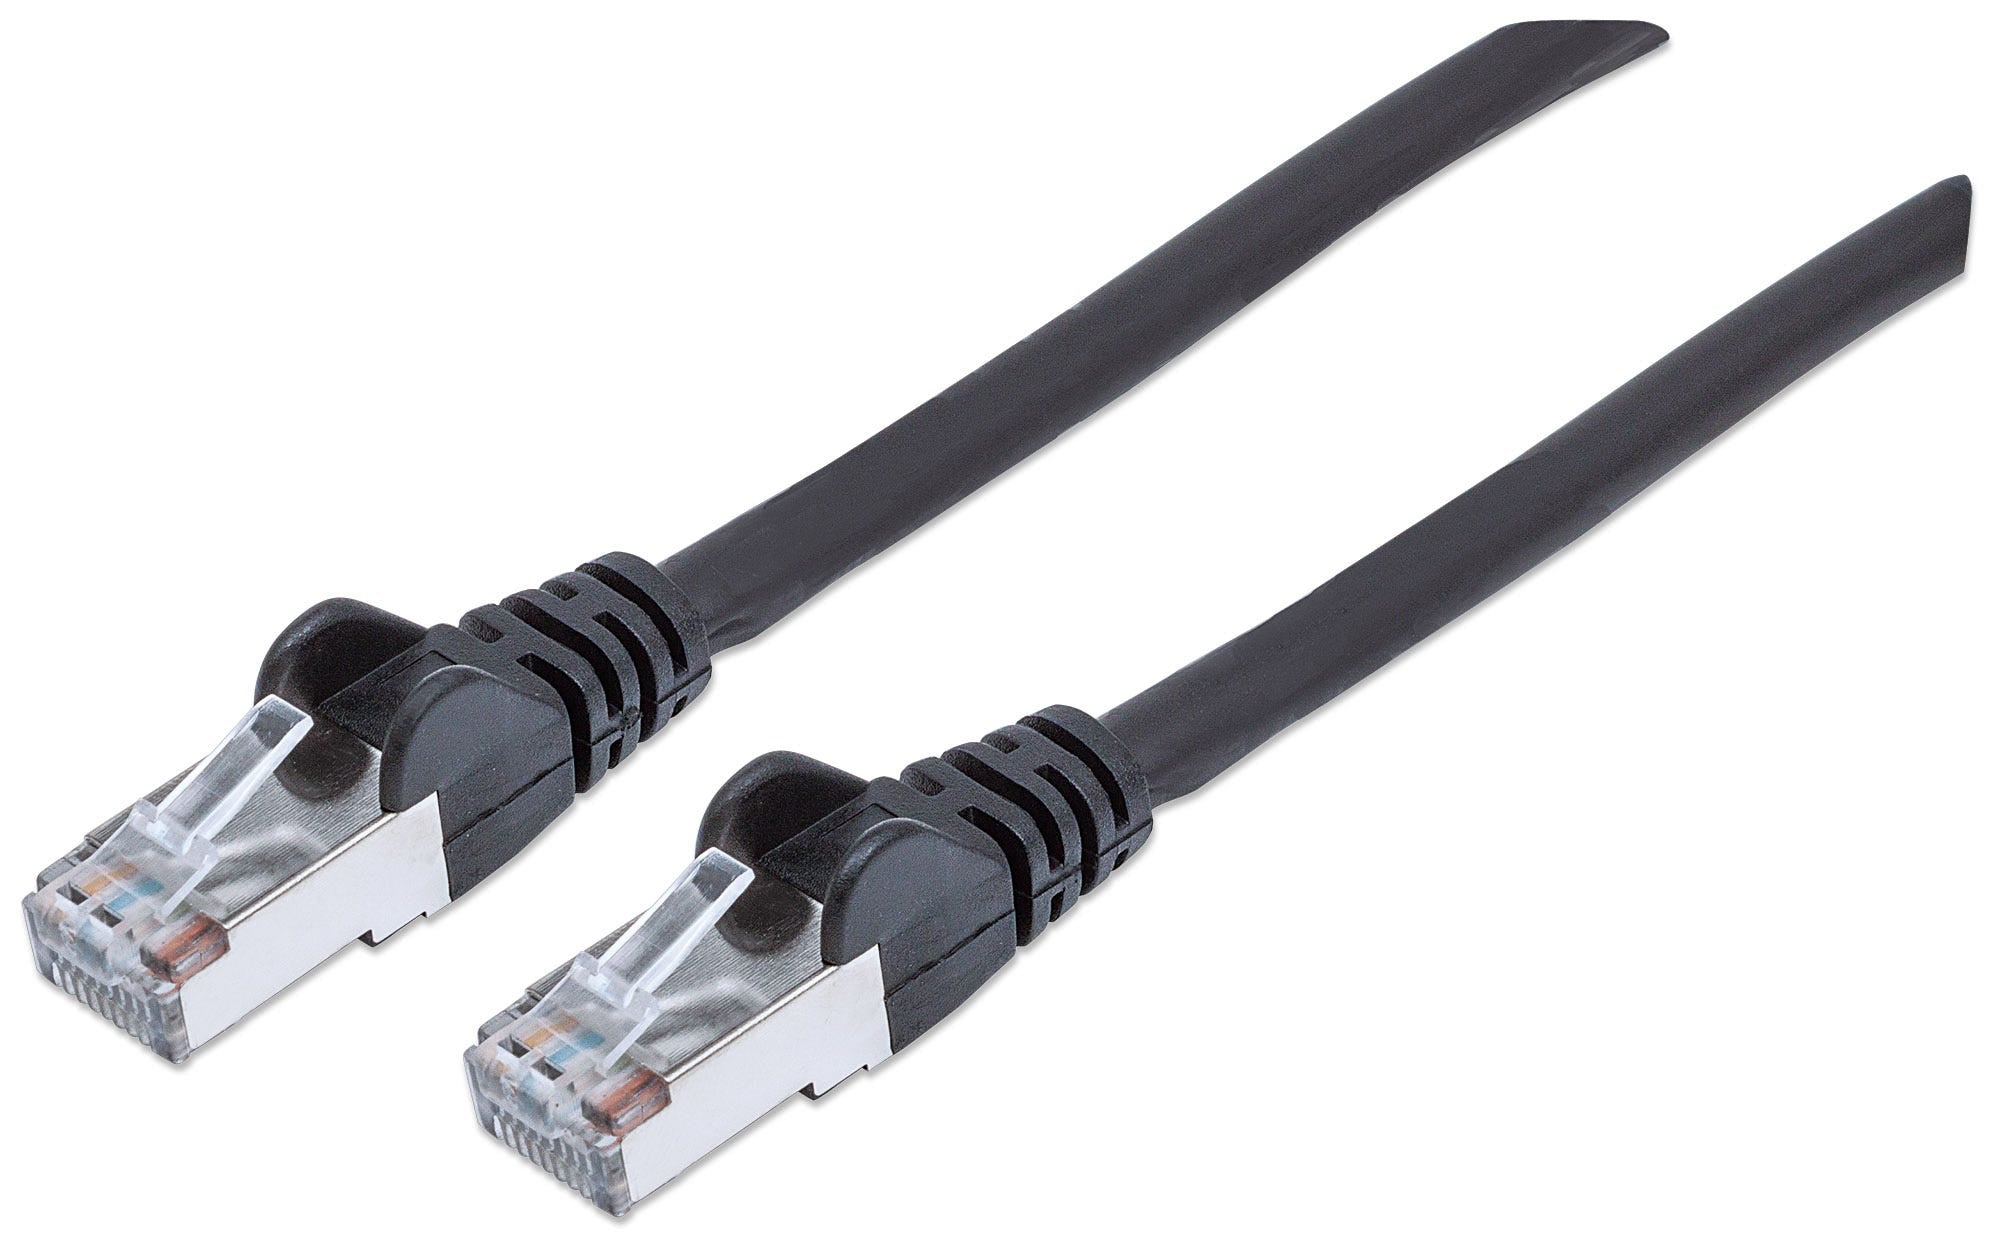 Intellinet Network Patch Cable, Cat6A, 10m, Black, Copper, S/FTP, LSOH / LSZH, PVC, RJ45, Gold Plated Contacts, Snagless, Booted, Lifetime Warranty, Polybag